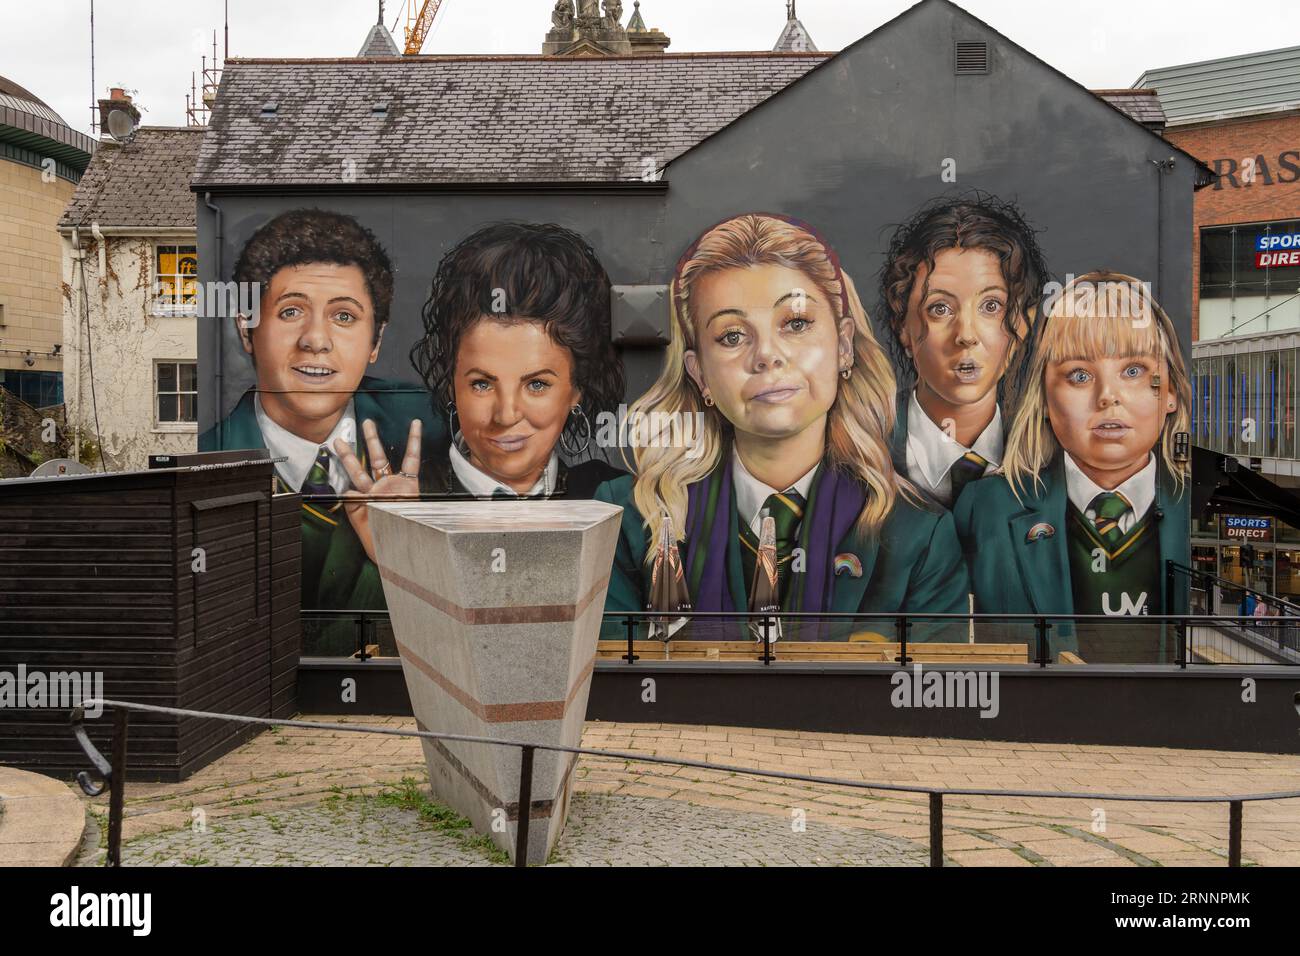 Derry Girls tv show mural in the city of Derry - Londonderry, northern Ireland. Stock Photo